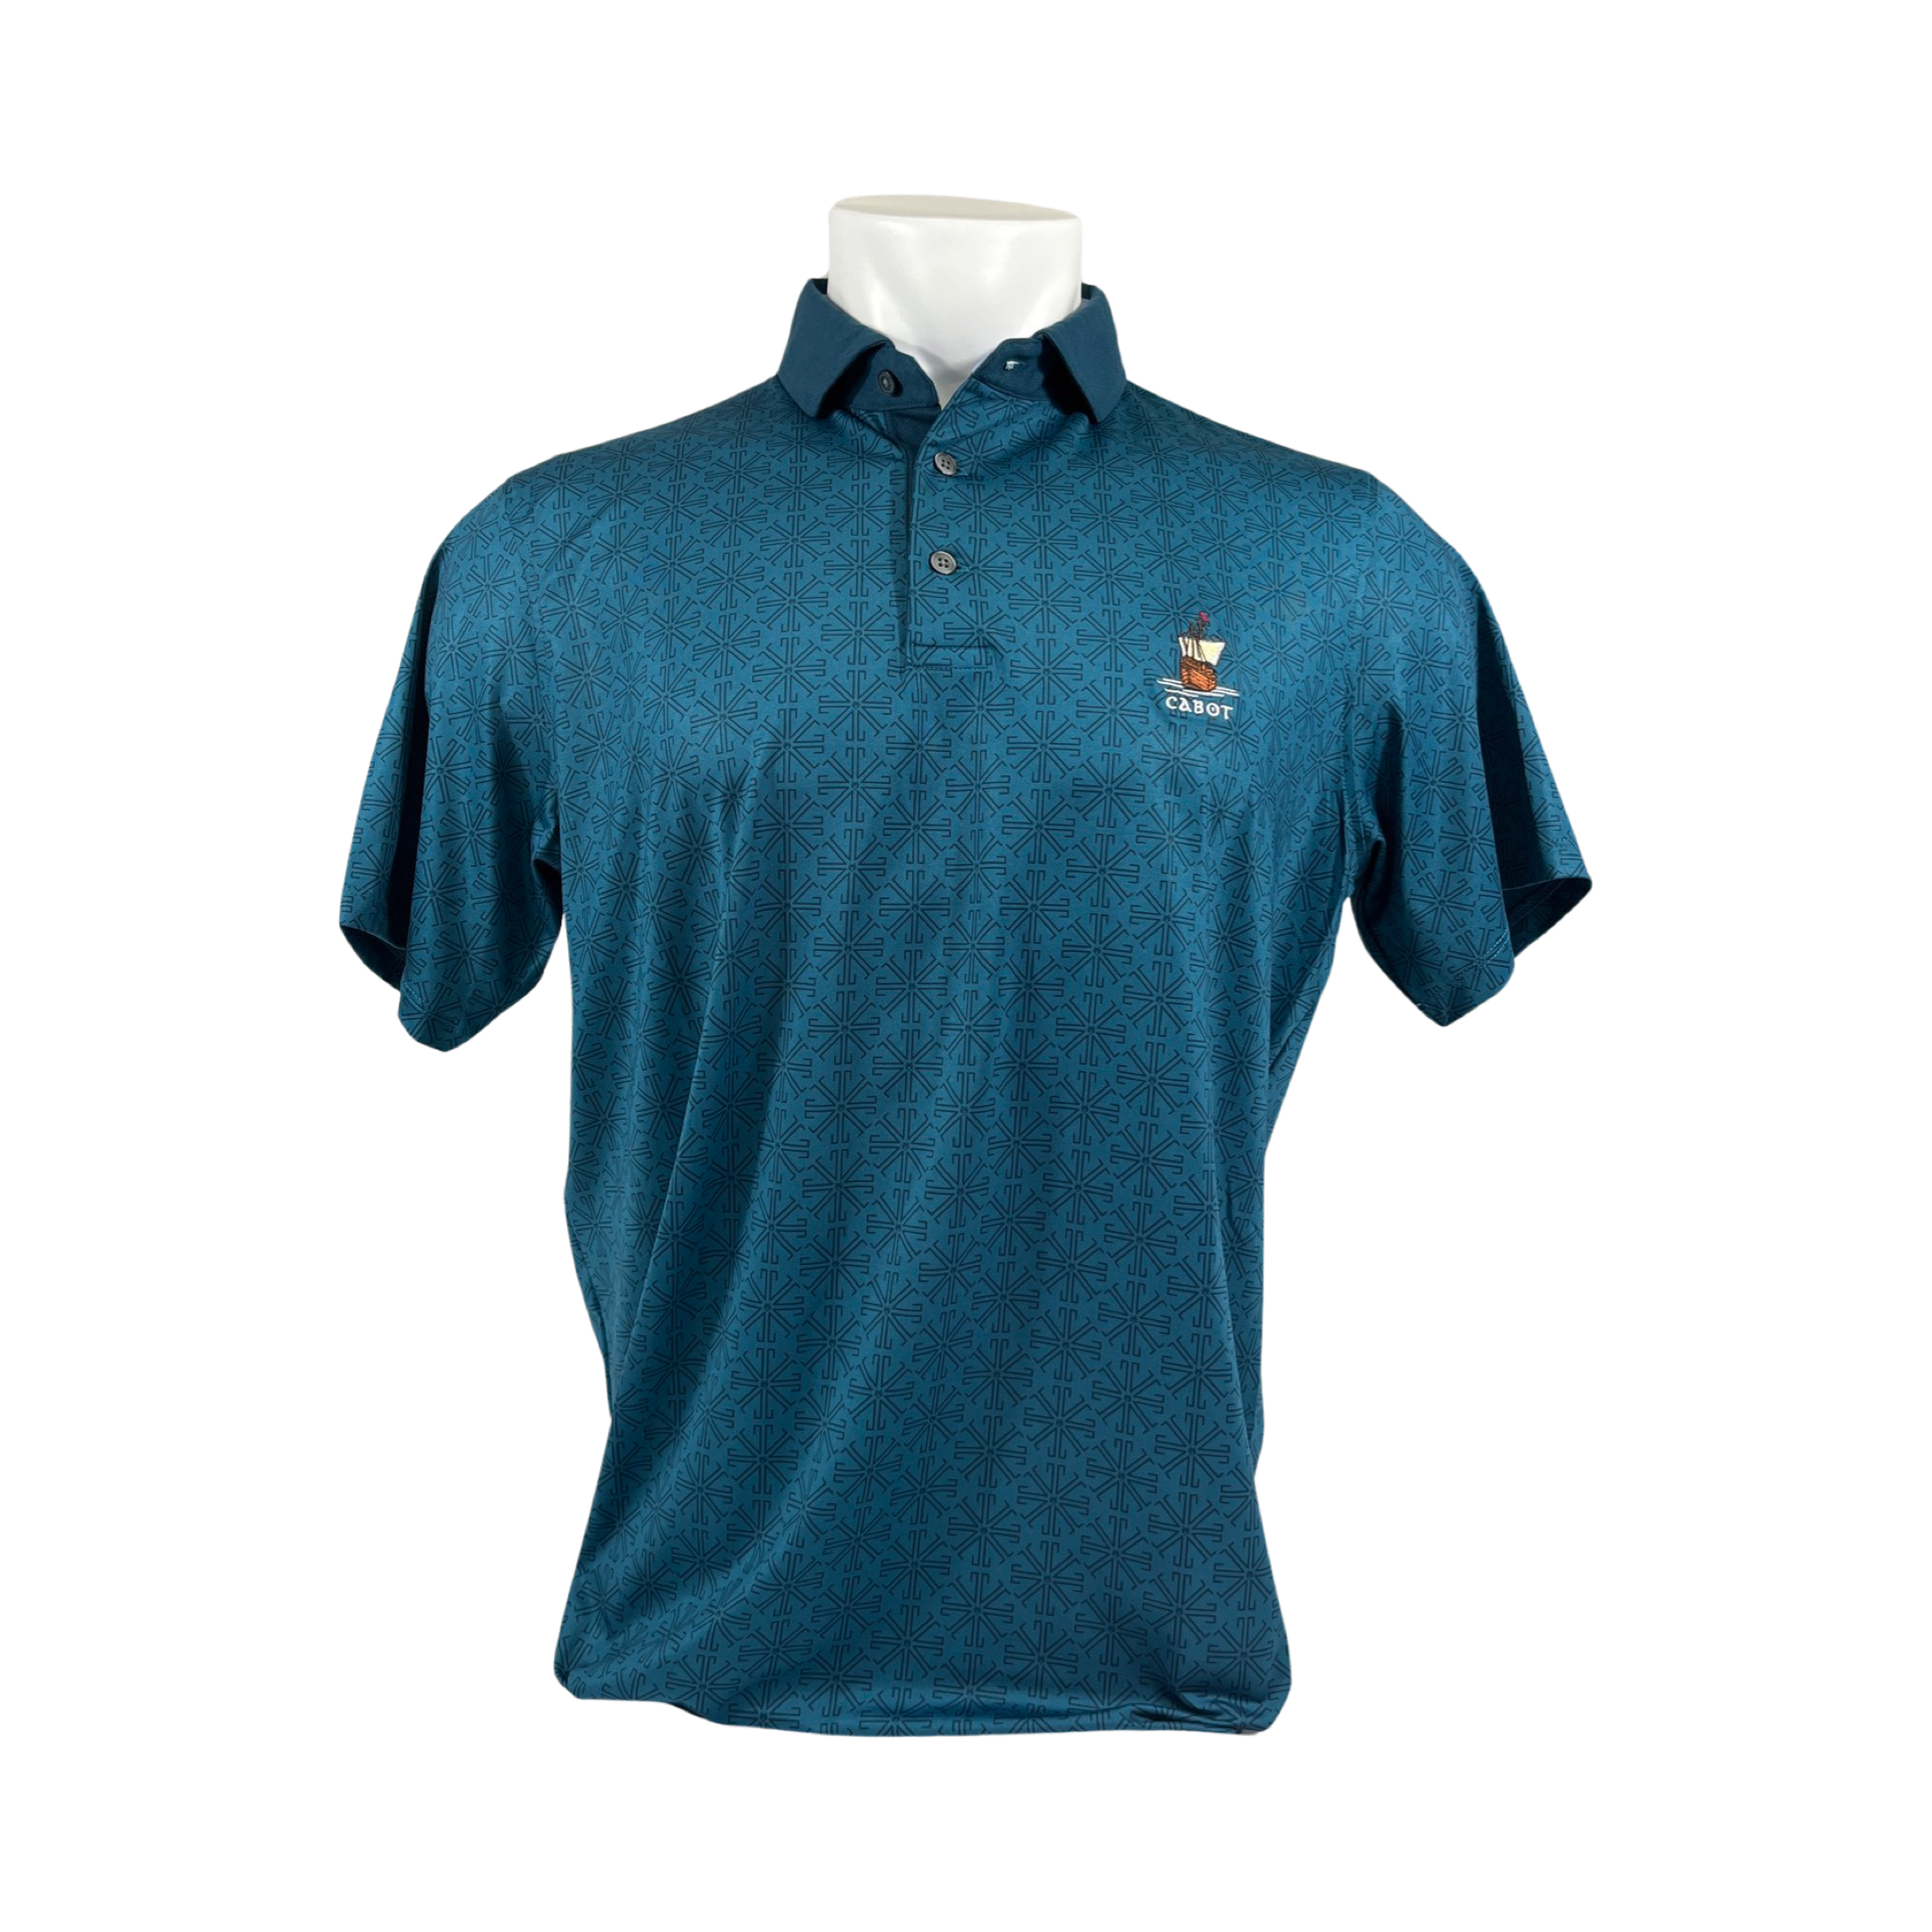 Greyson Cabot Links Lions Tooth Polo